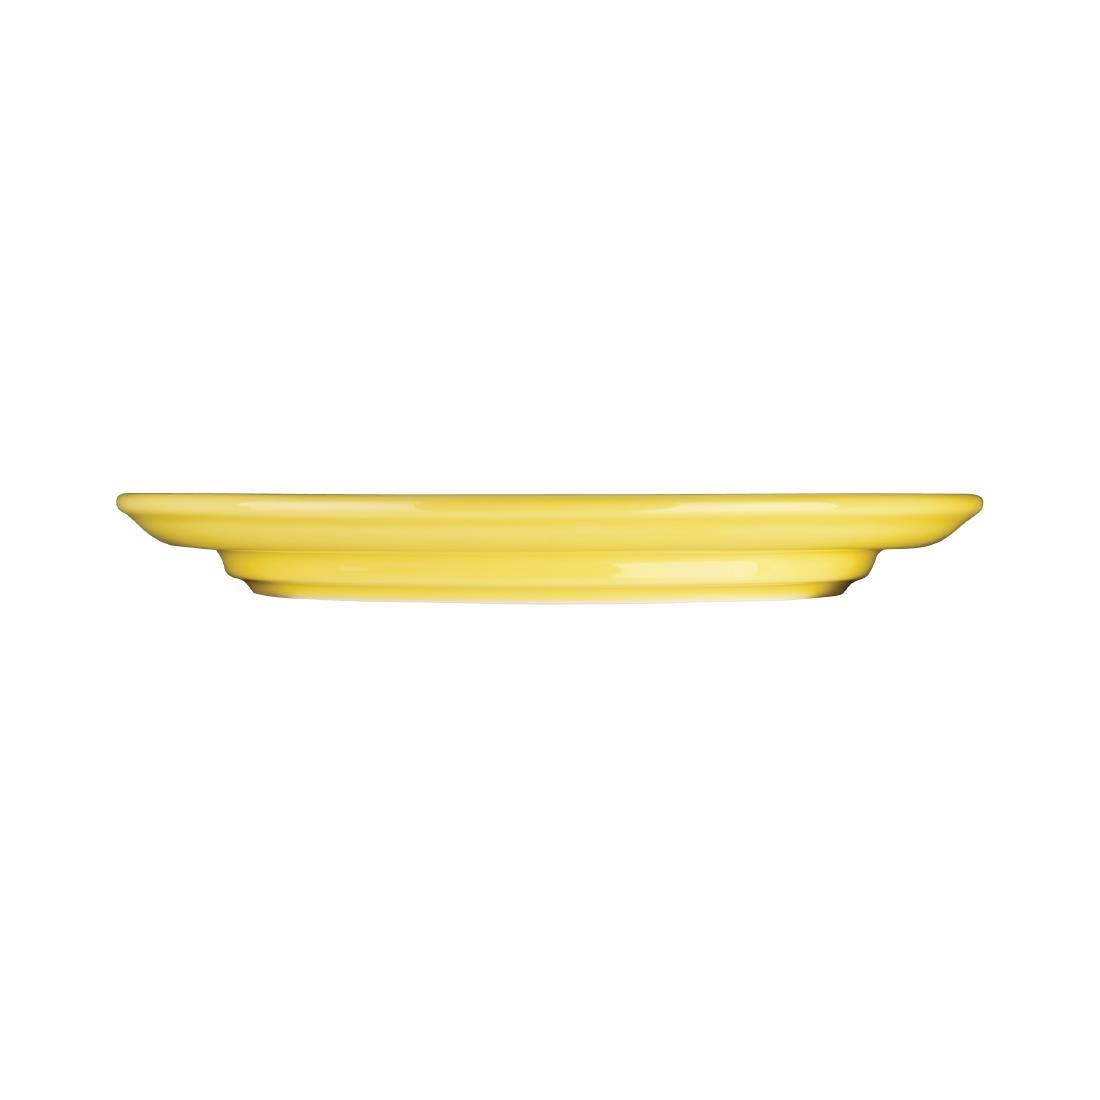 Olympia Heritage Raised Rim Plates Yellow 253mm (Pack of 4) - DW147  - 3